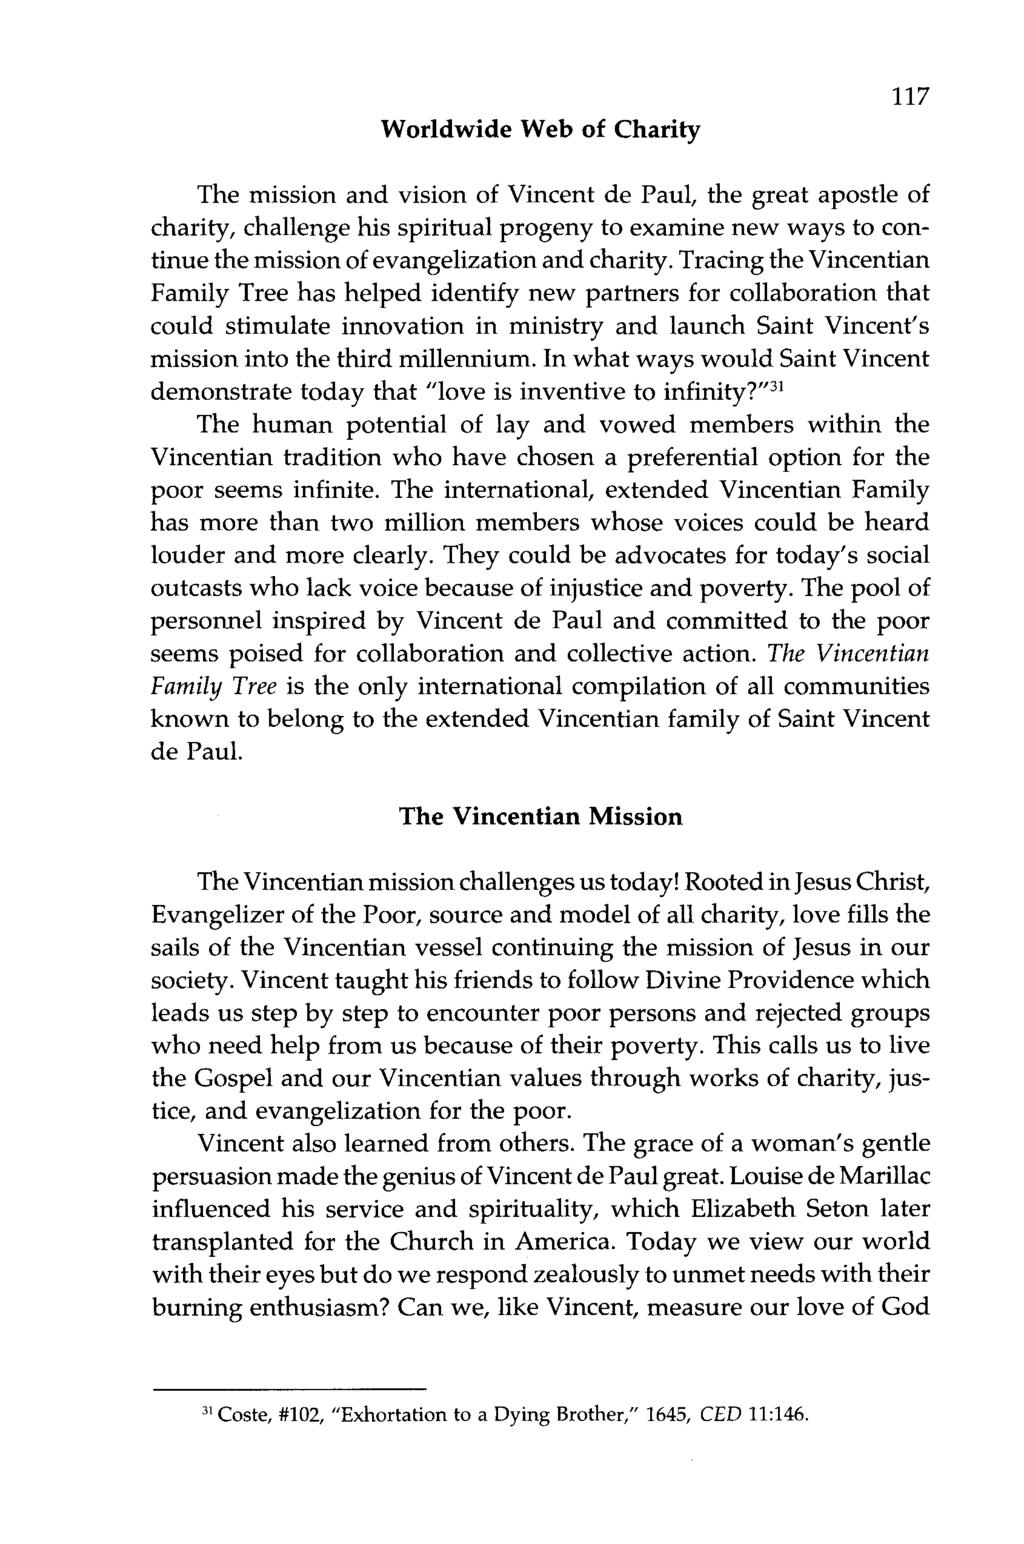 Worldwide Web of Charity 117 The mission and vision of Vincent de Paul, the great apostle of charity, challenge his spiritual progeny to examine new ways to continue the mission ofevangelization and